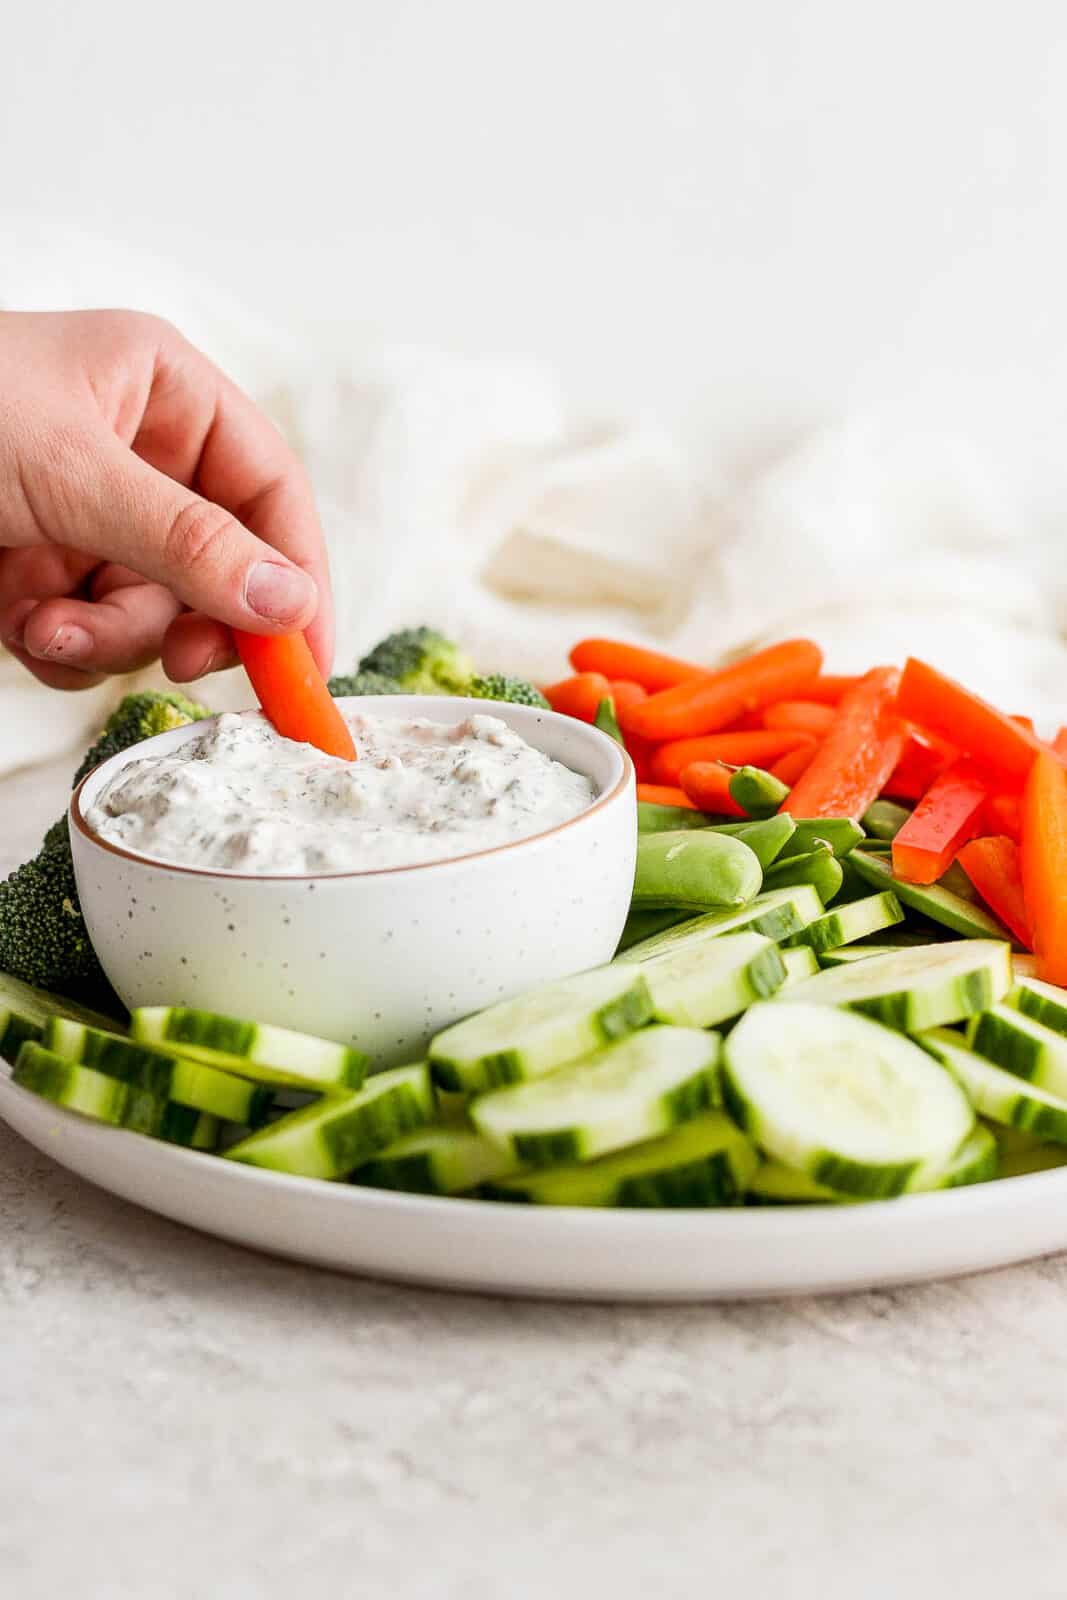 A carrot being dipped in a small dish of healthy veggie dip on a plate of veggies.